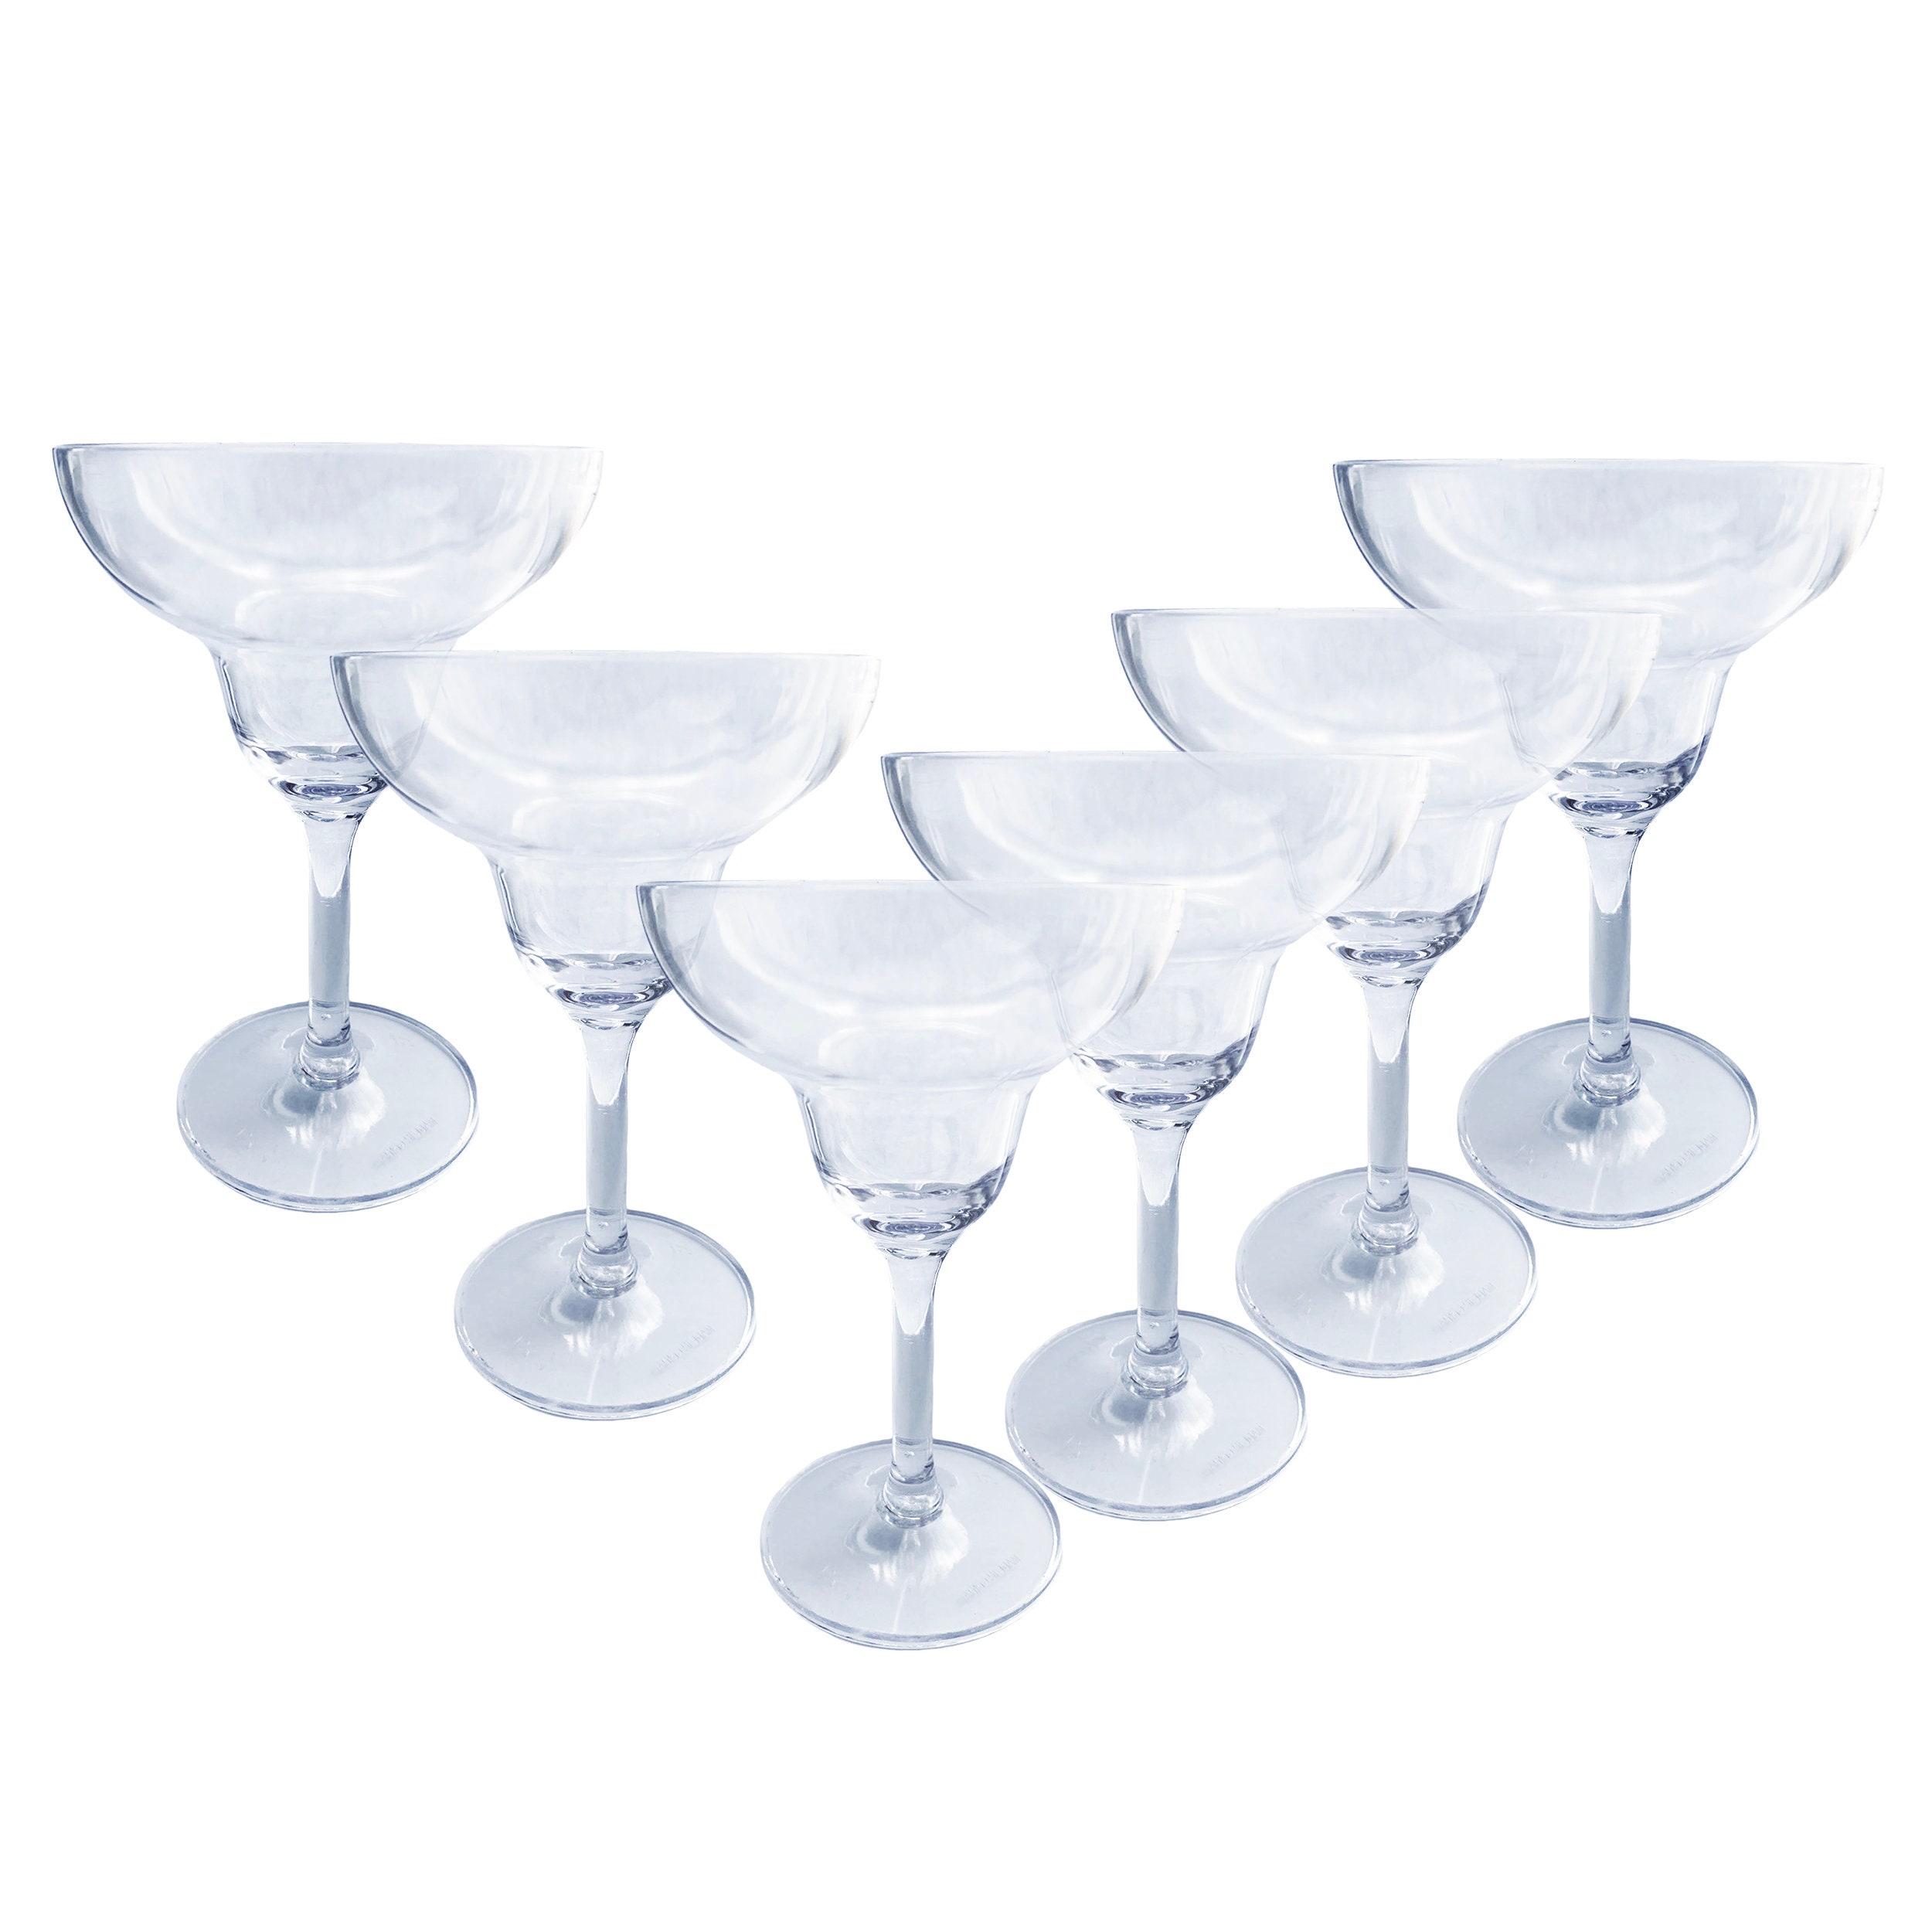 10-Count Clear Party Essentials Hard Plastic Two Piece 5.5-Ounce Wine Glasses 